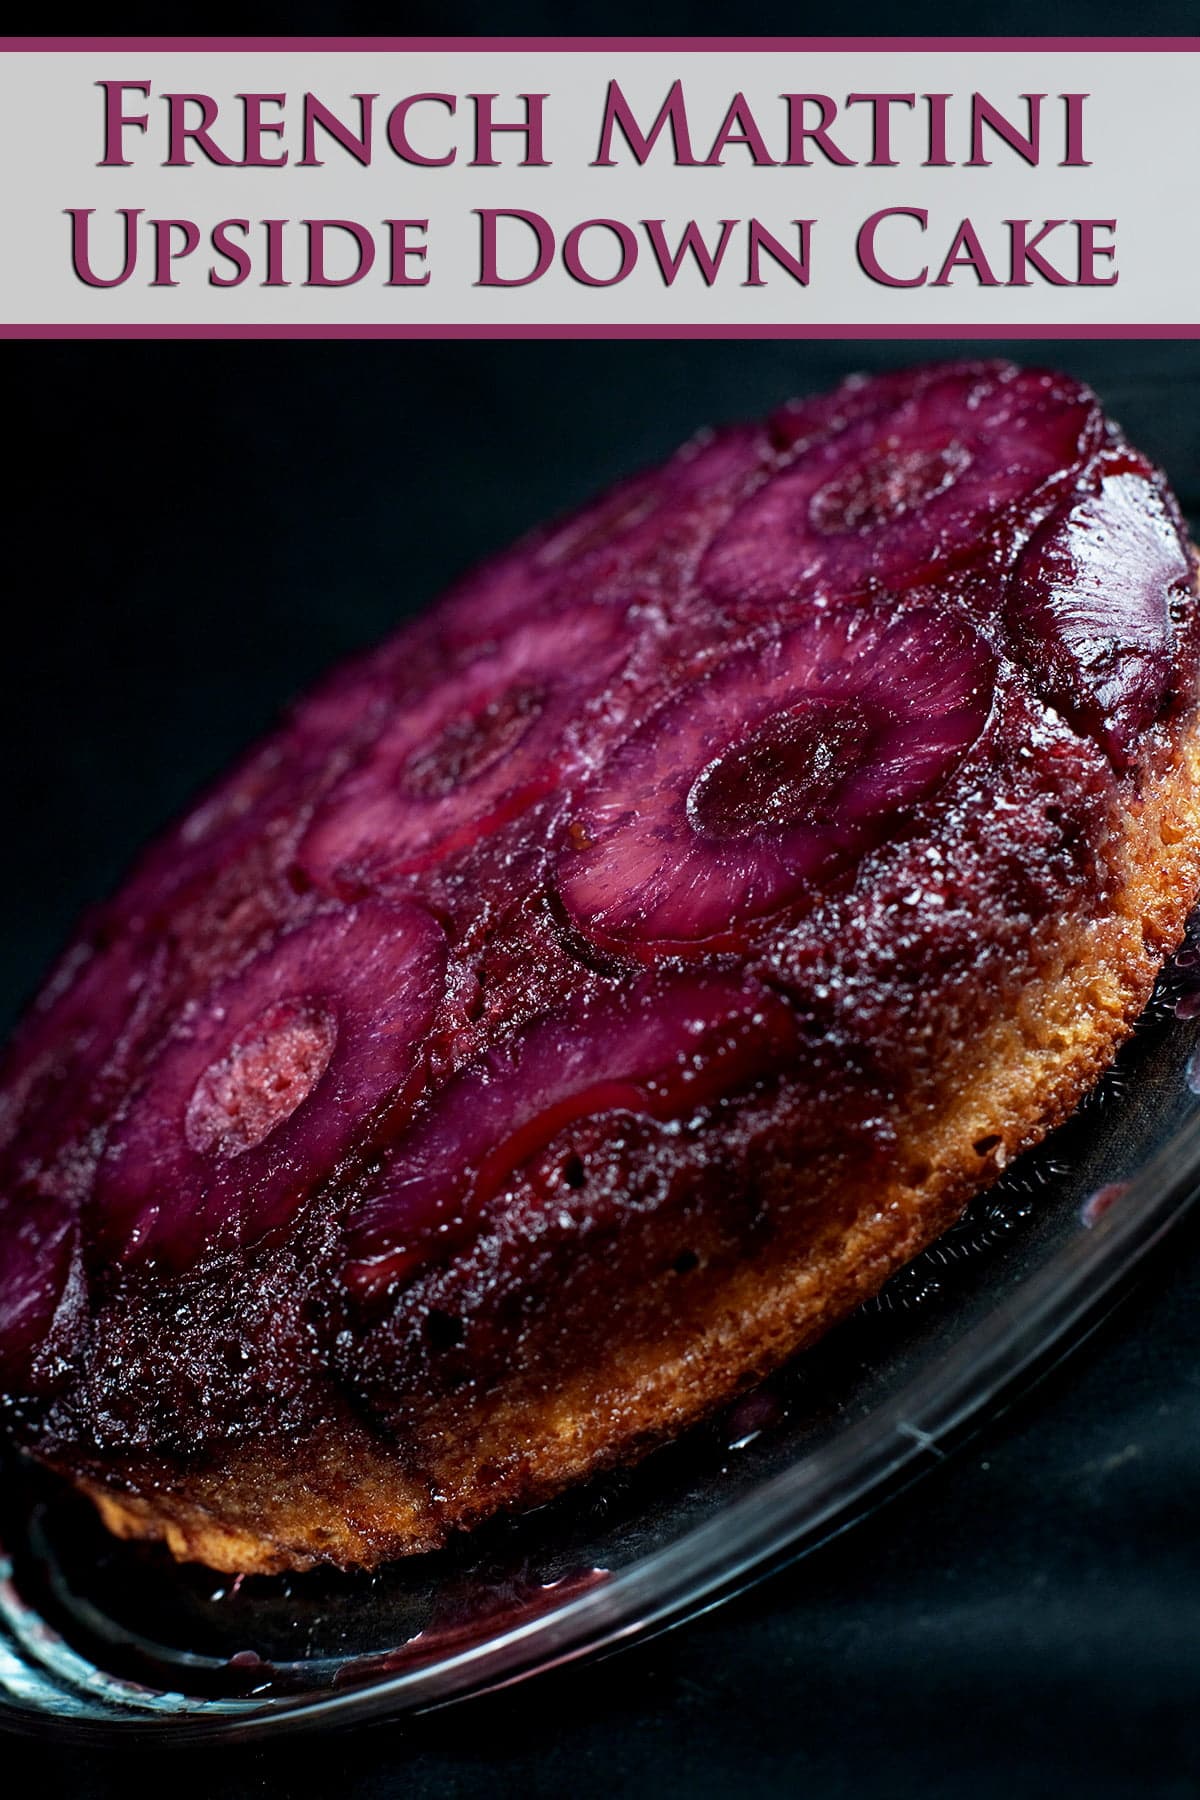 French Martini Upside Down Cake - A round pineapple upside down cake, with a VERY purple top.